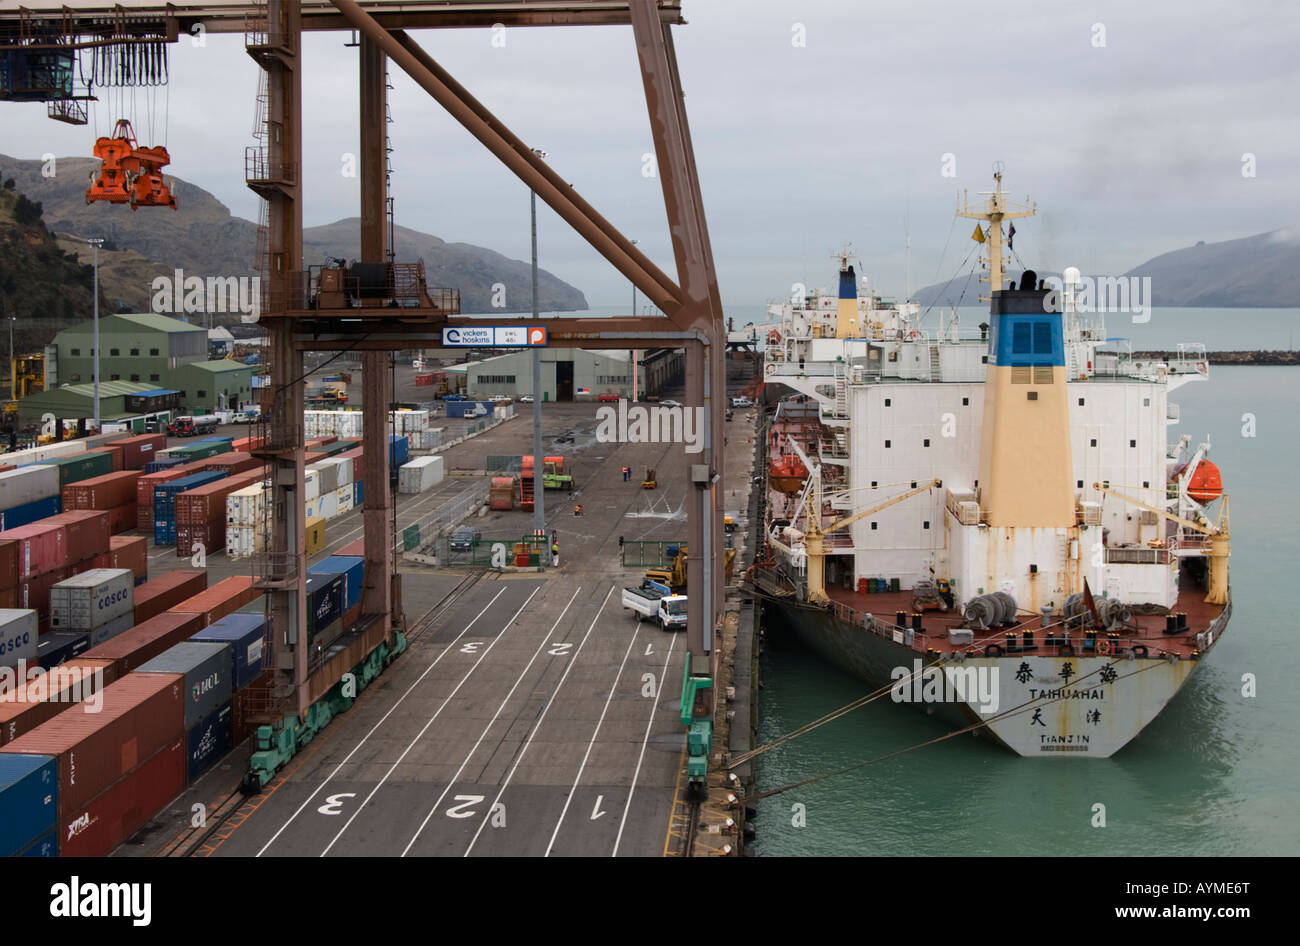 2 bulk carrying cargo ship moored alongside the quay at Lyttelton, New Zealand. The legs of a container crane dwarf the ships. Stock Photo